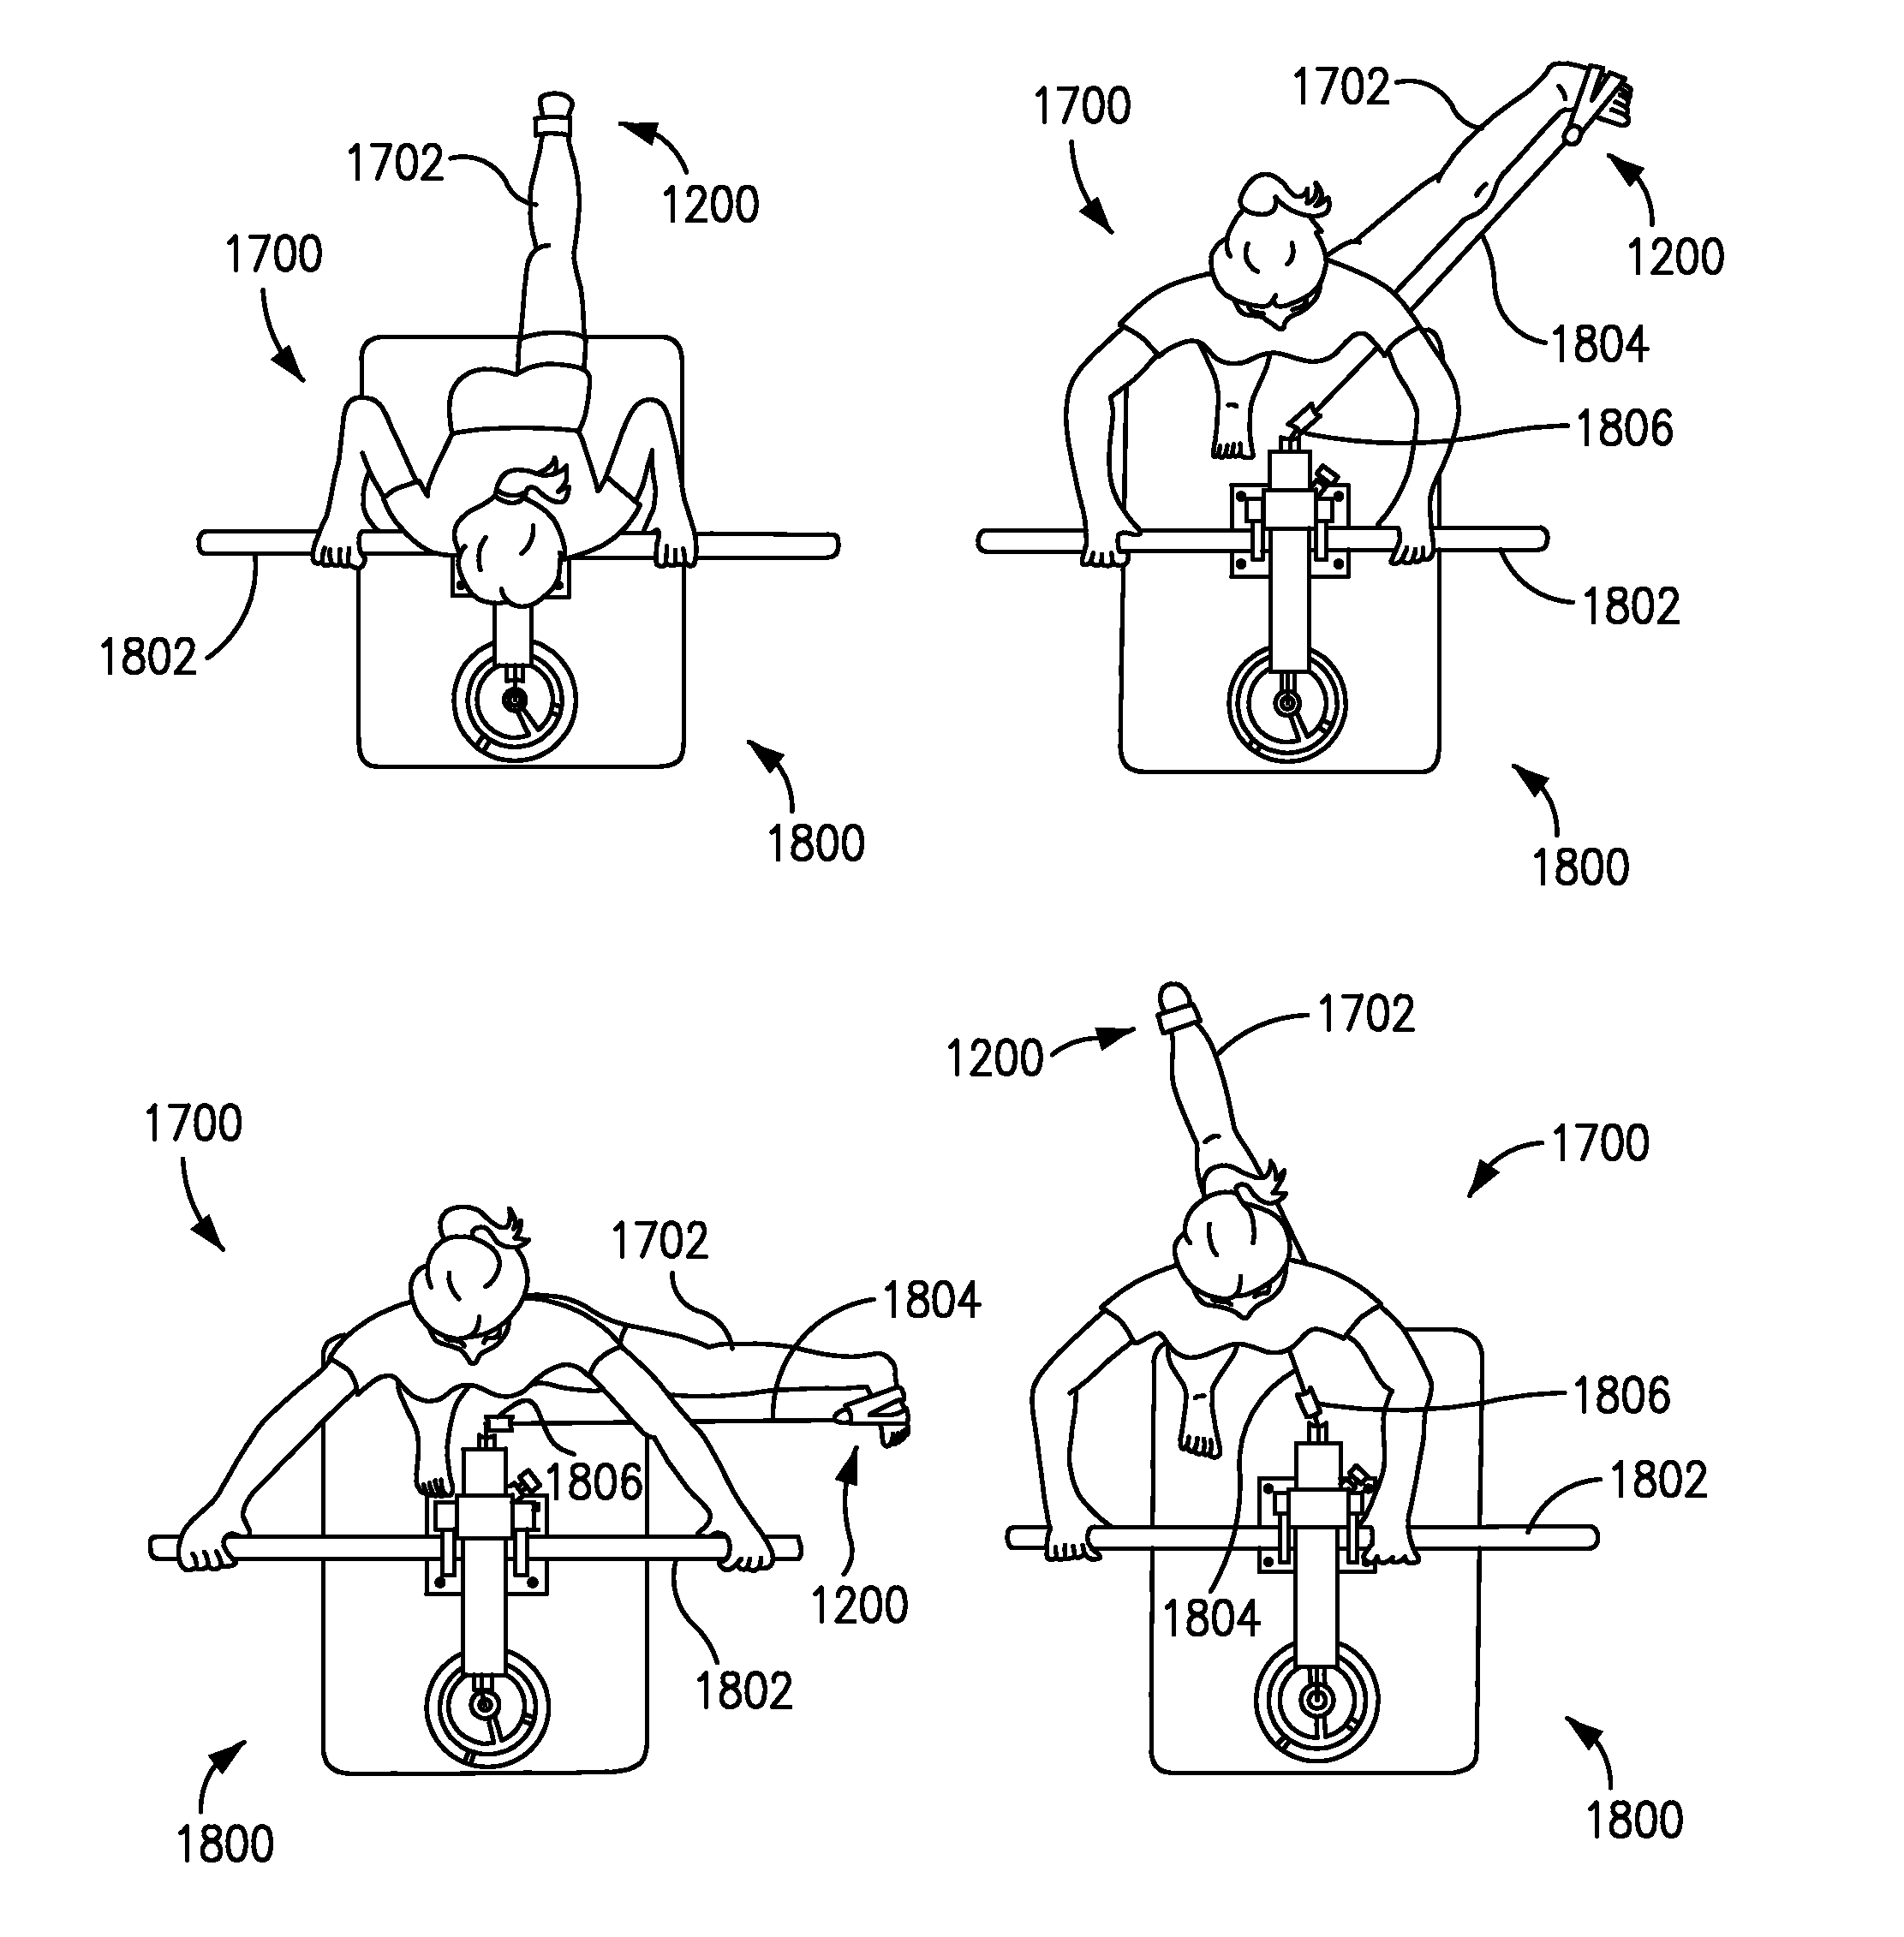 Lower extremity receiving device for providing enhanced leg mobility during lower body exercise